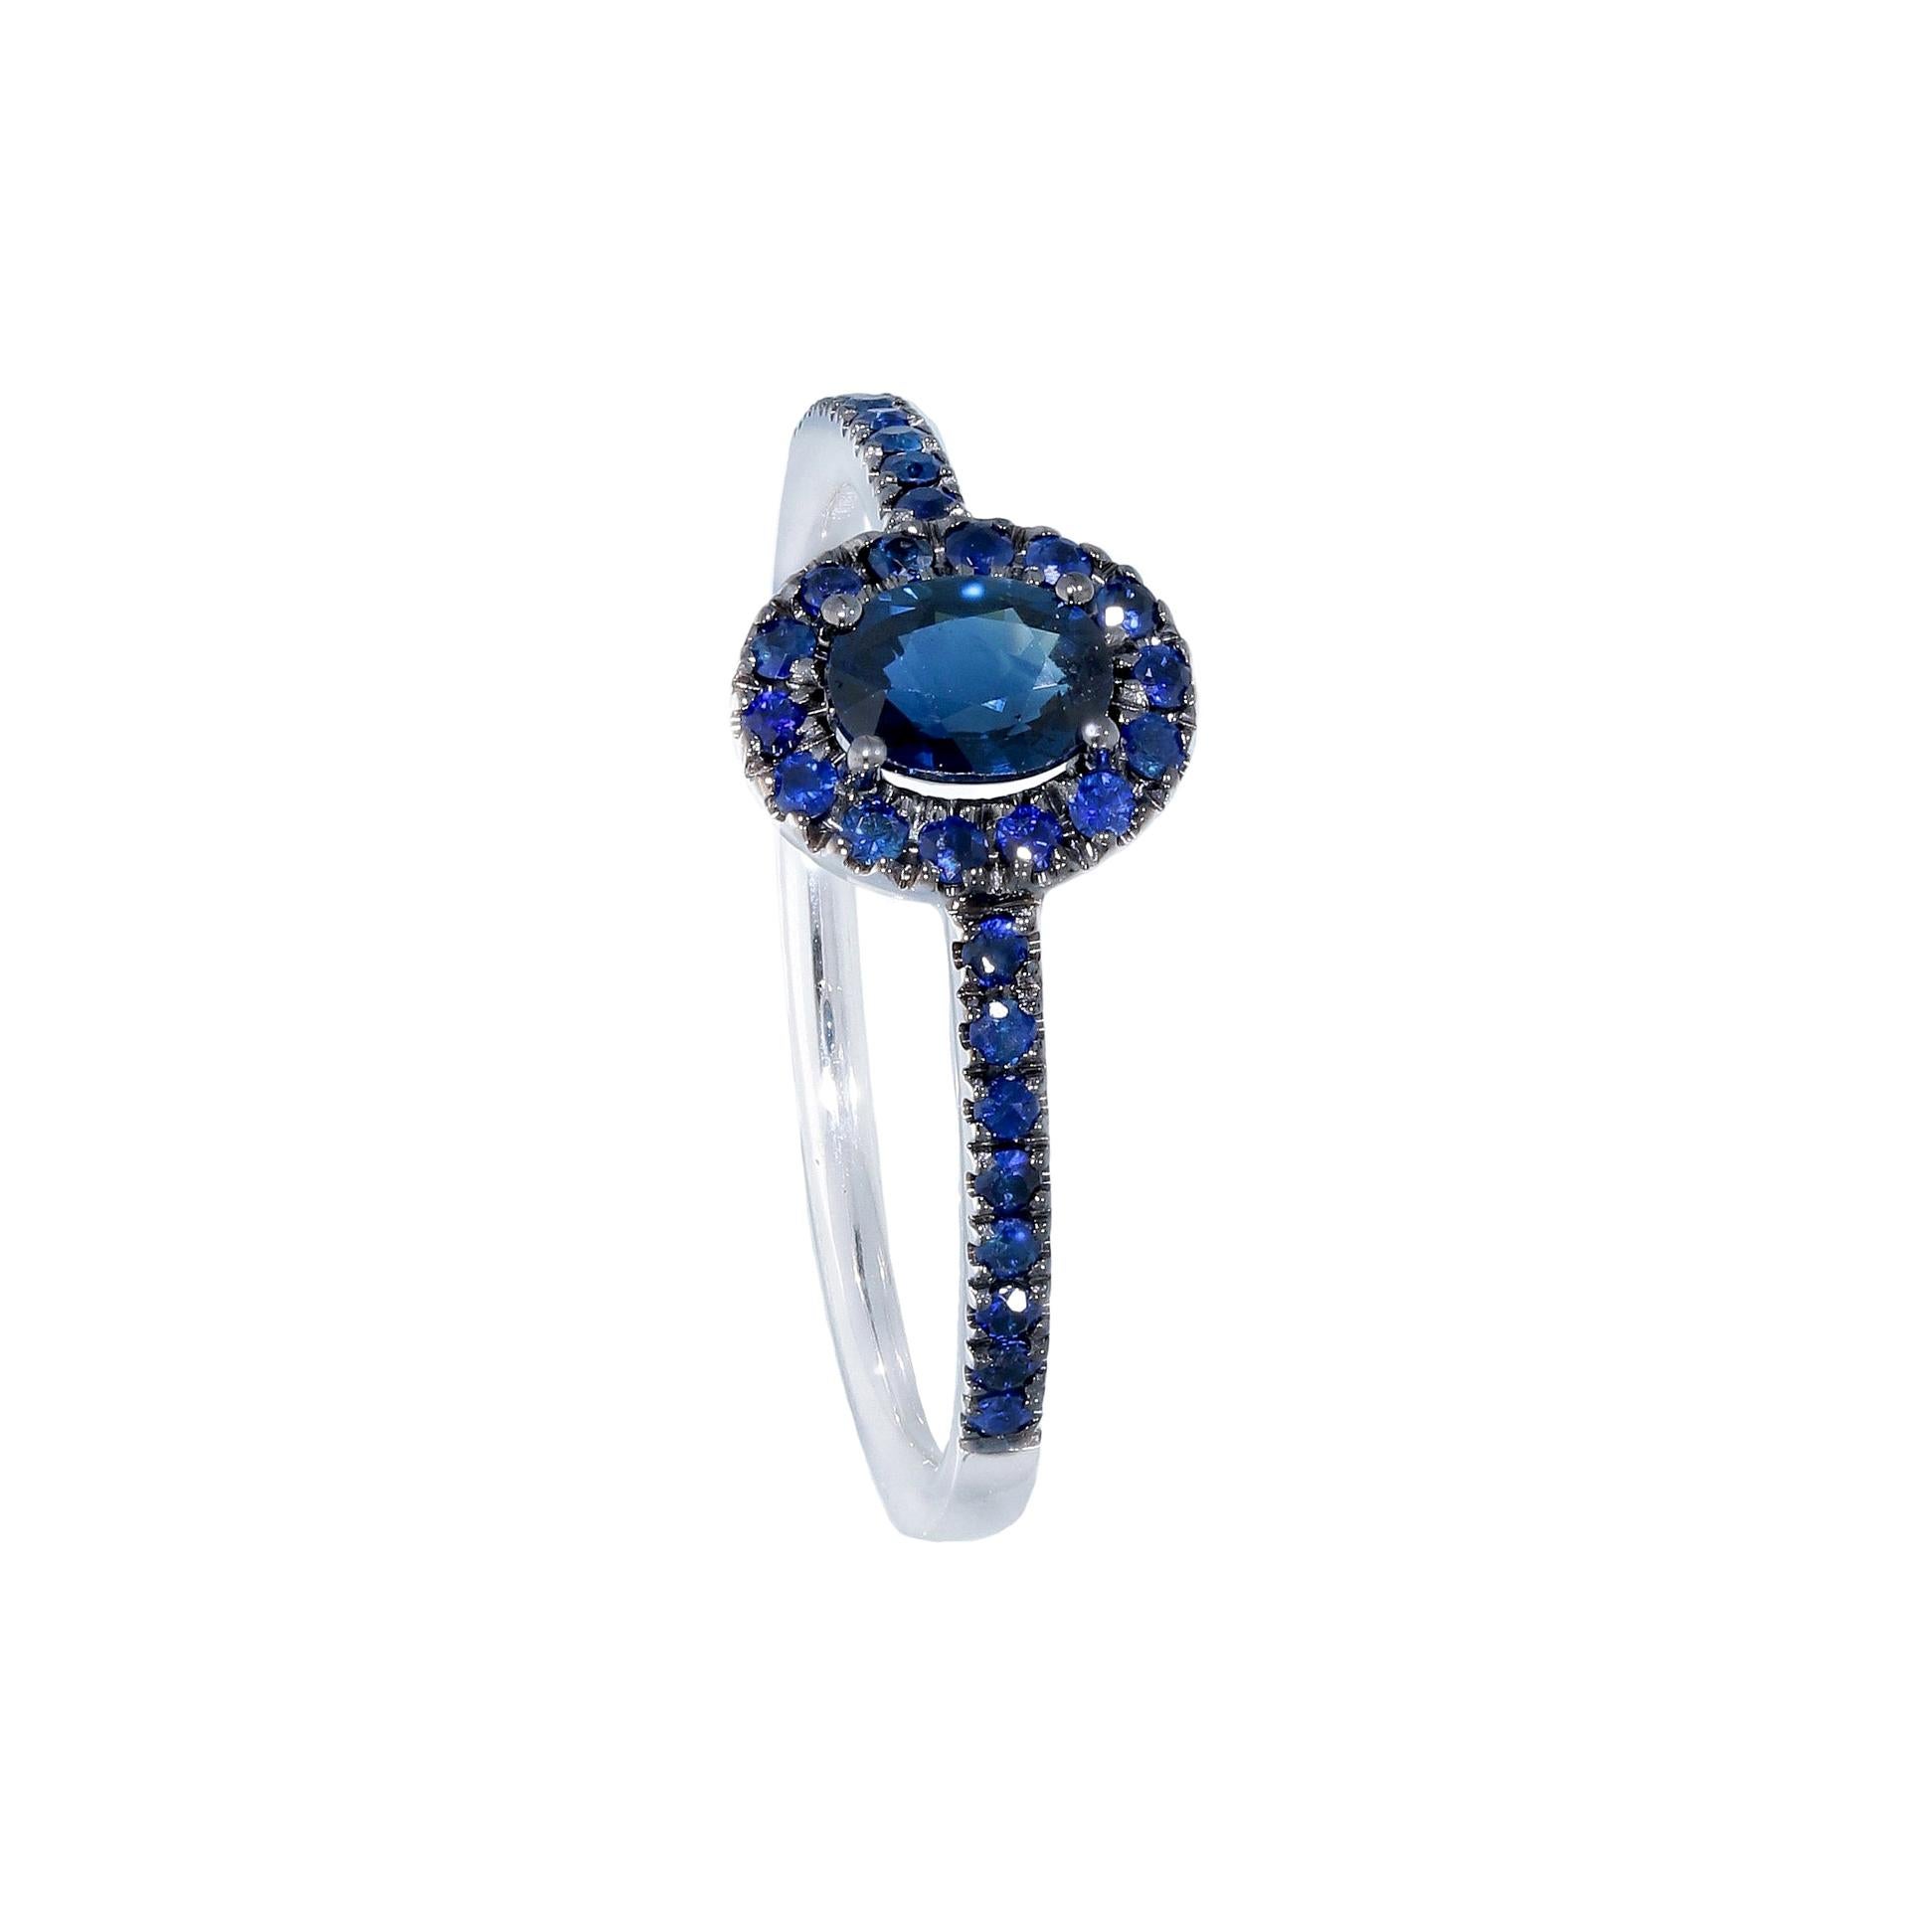 For Sale:  18k Black and White Golg Wedding Ring with Blue Sapphire